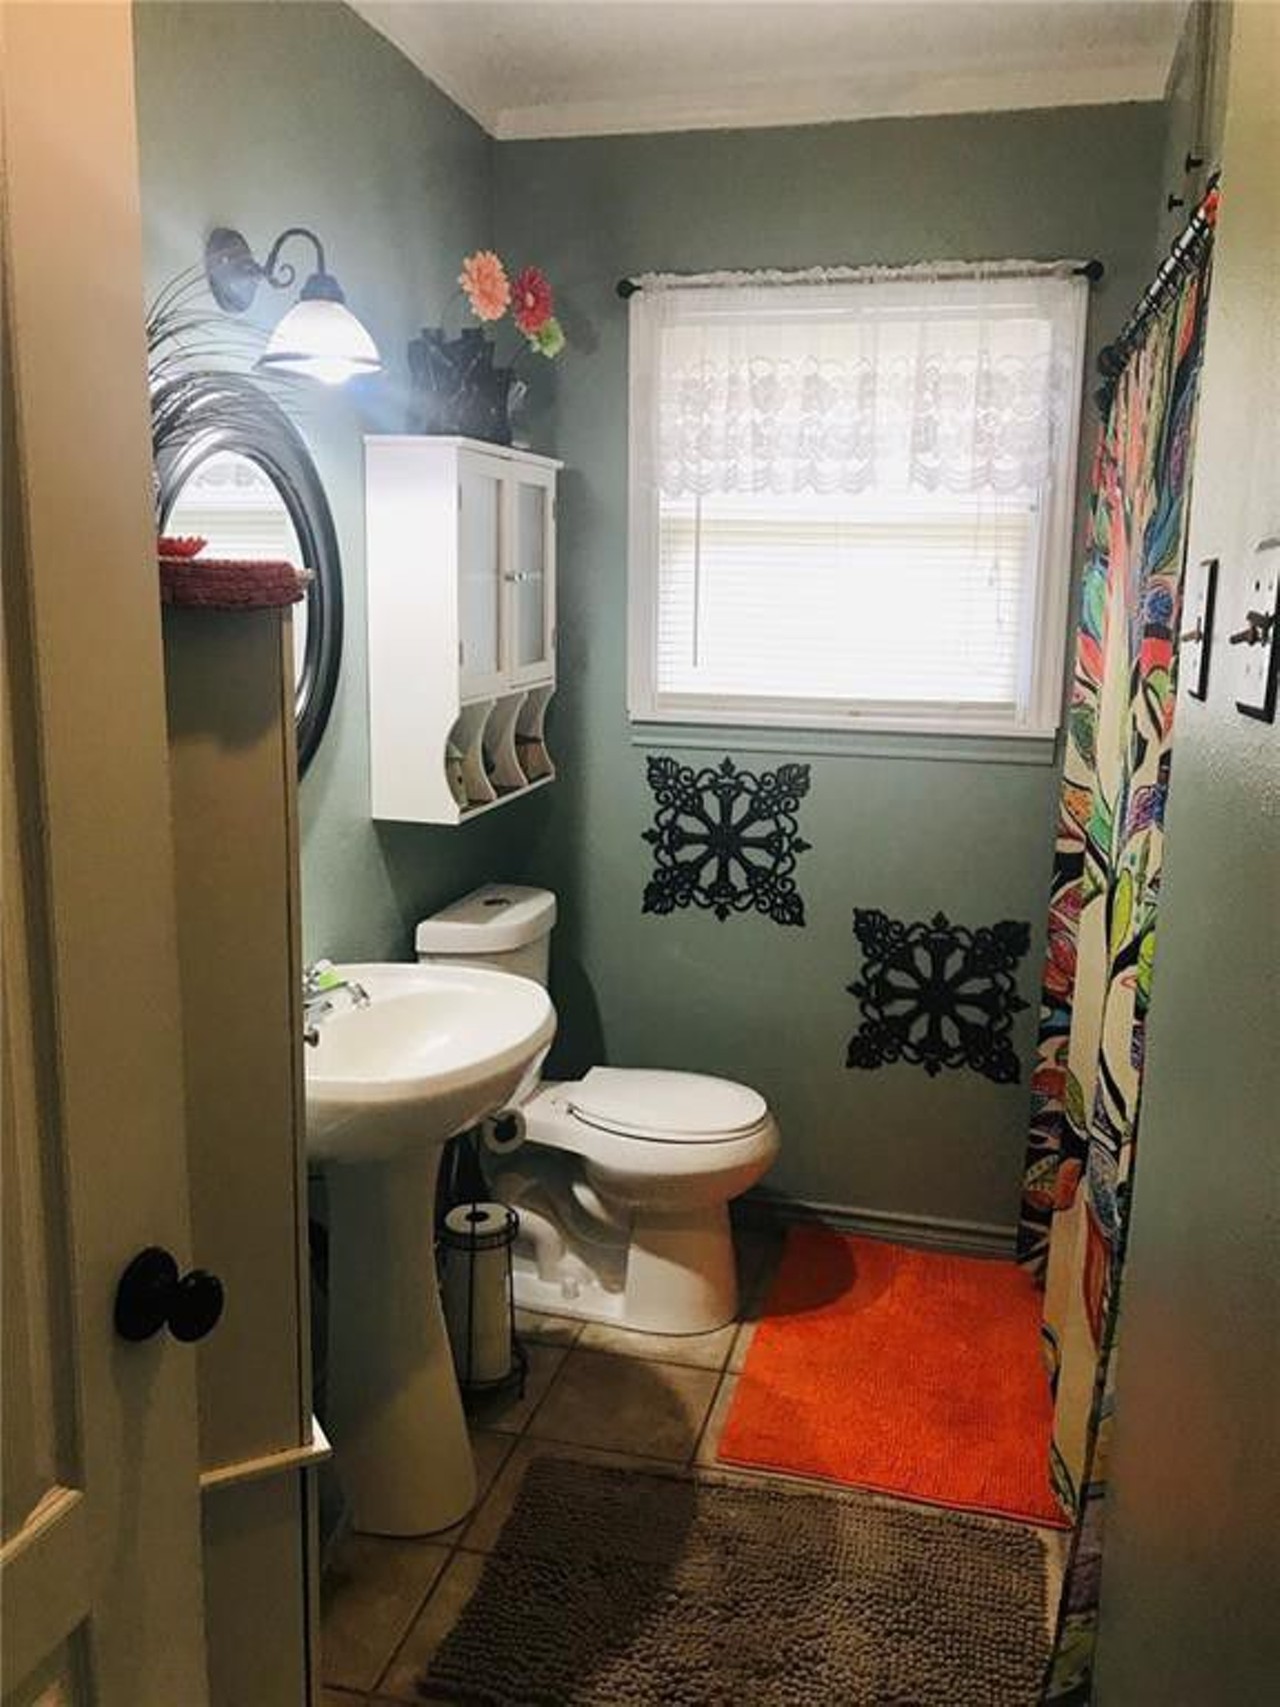 There's only one bathroom on the property. We're sure Farrah spent plenty of time working on her gorgeous 'do here.